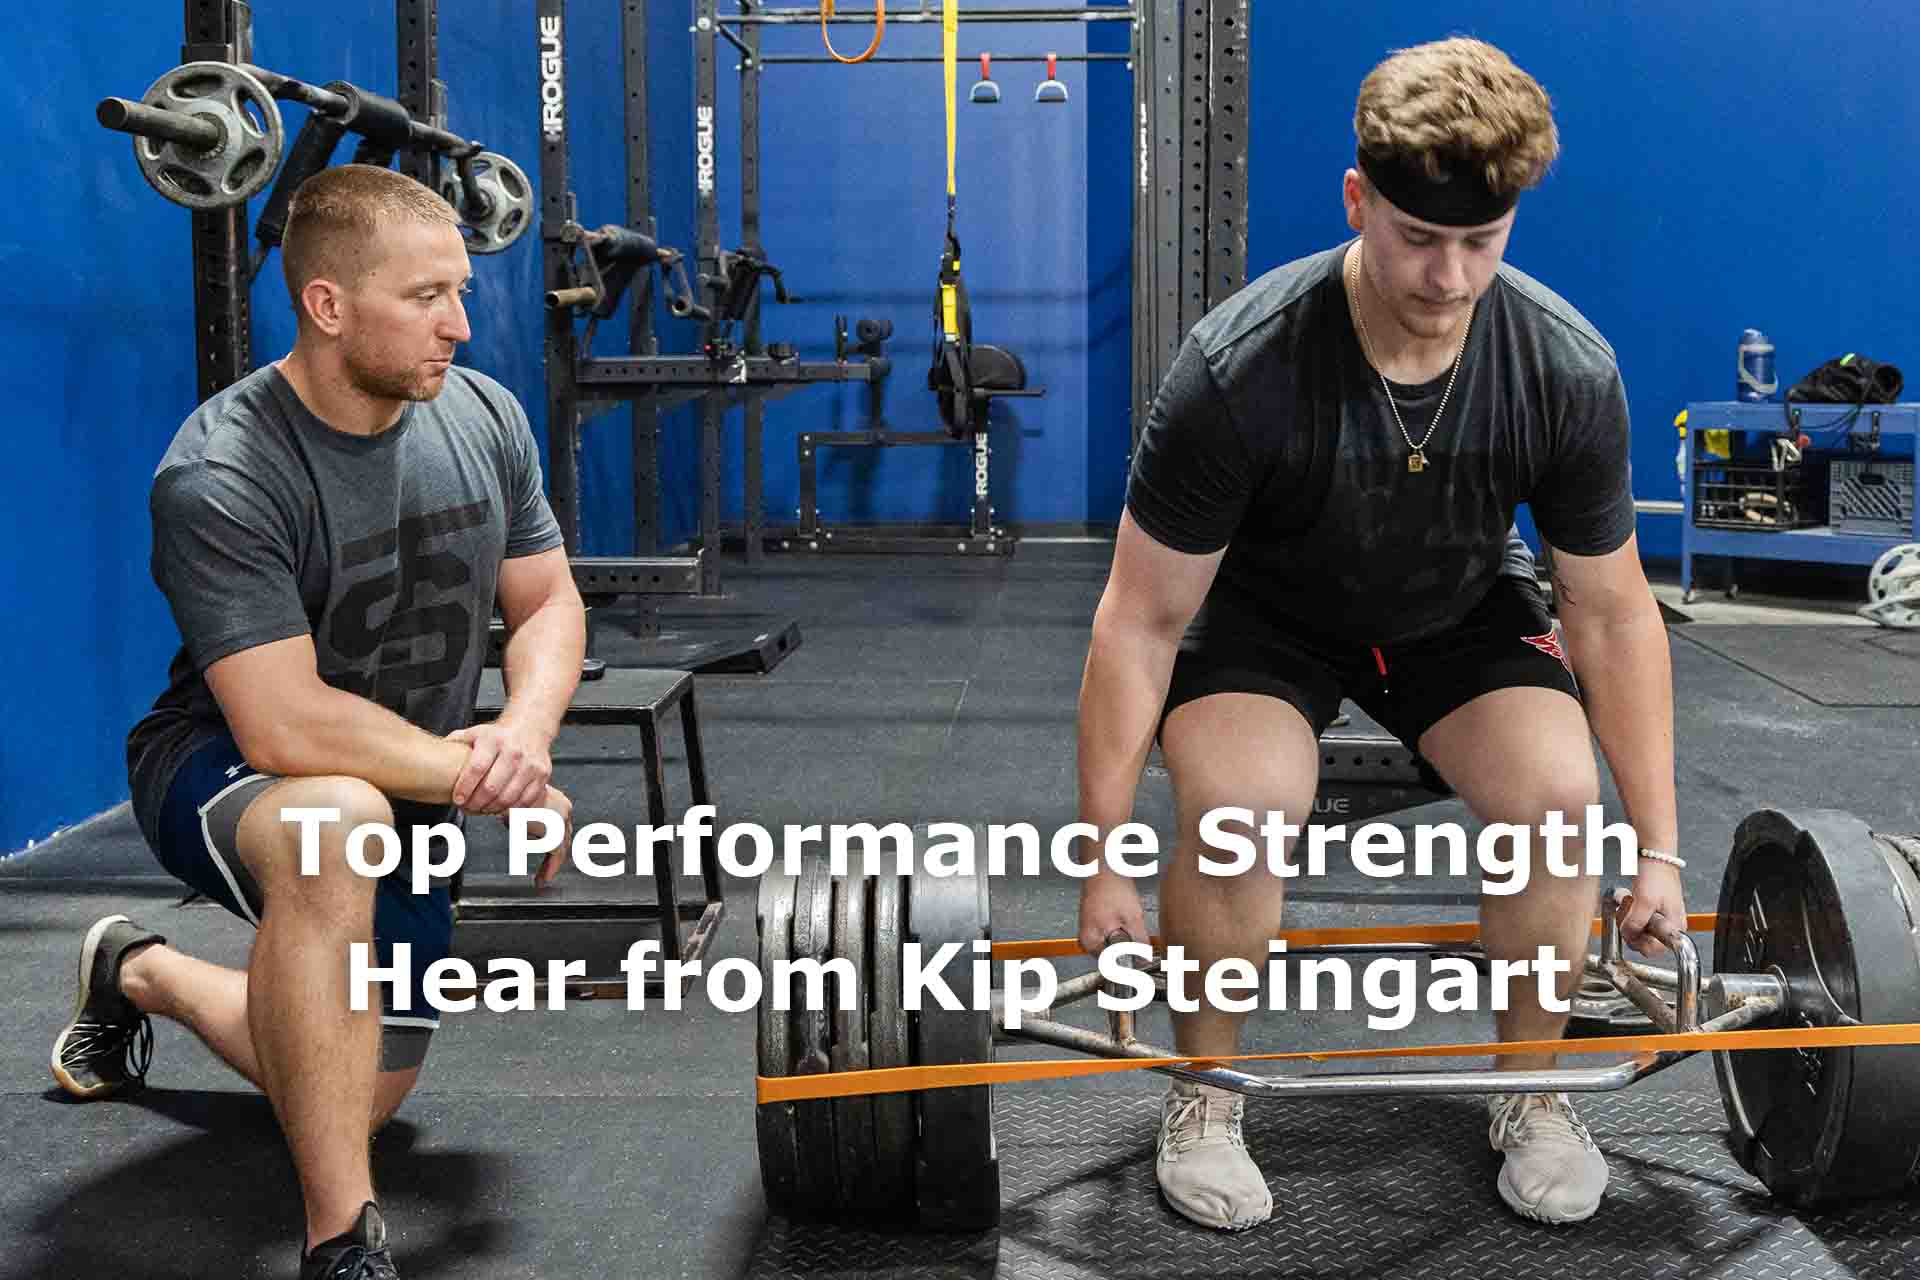 Strength Top Training Athletes Strength for Performance -